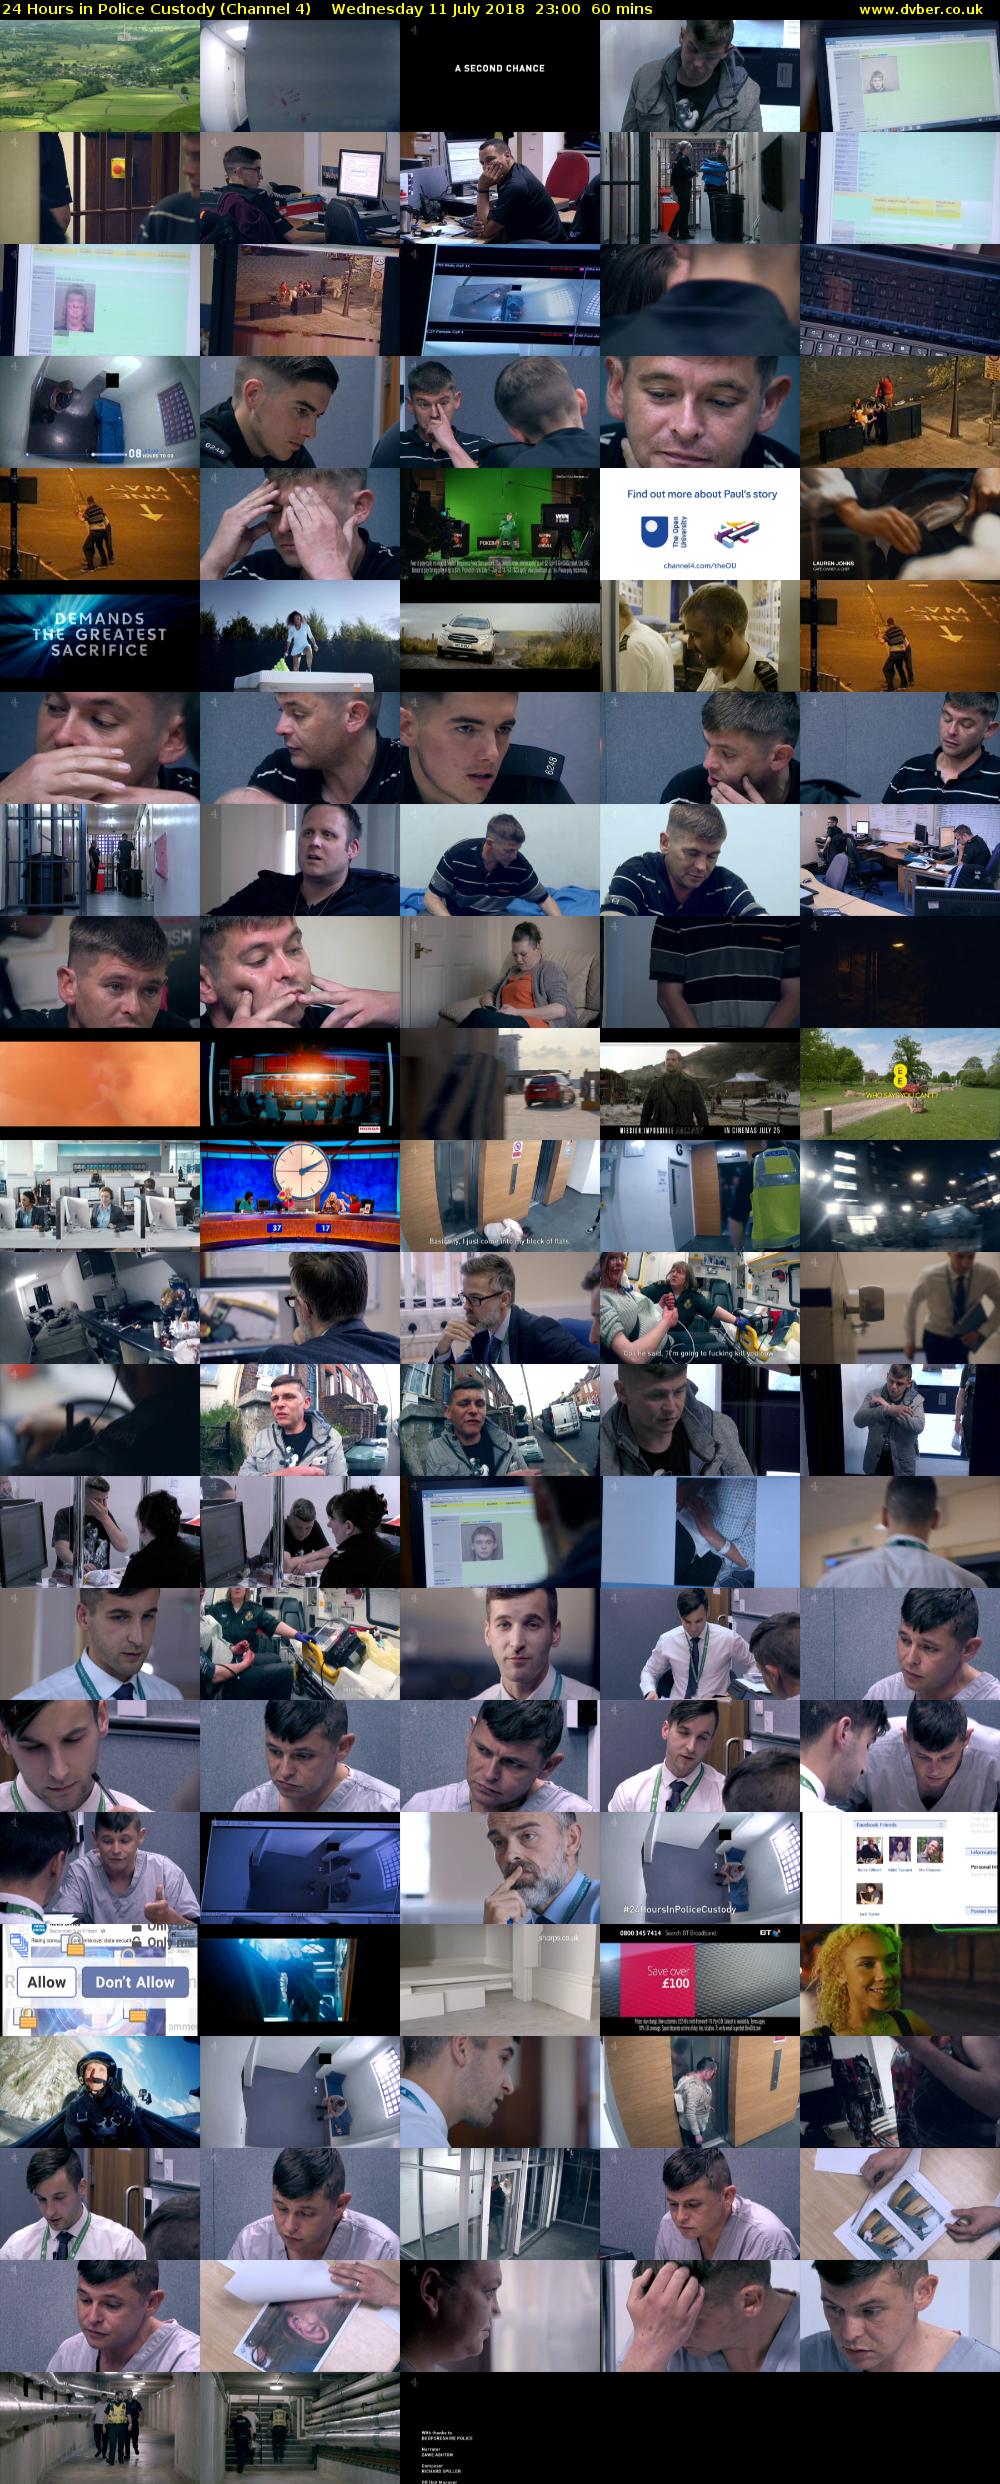 24 Hours in Police Custody (Channel 4) Wednesday 11 July 2018 23:00 - 00:00